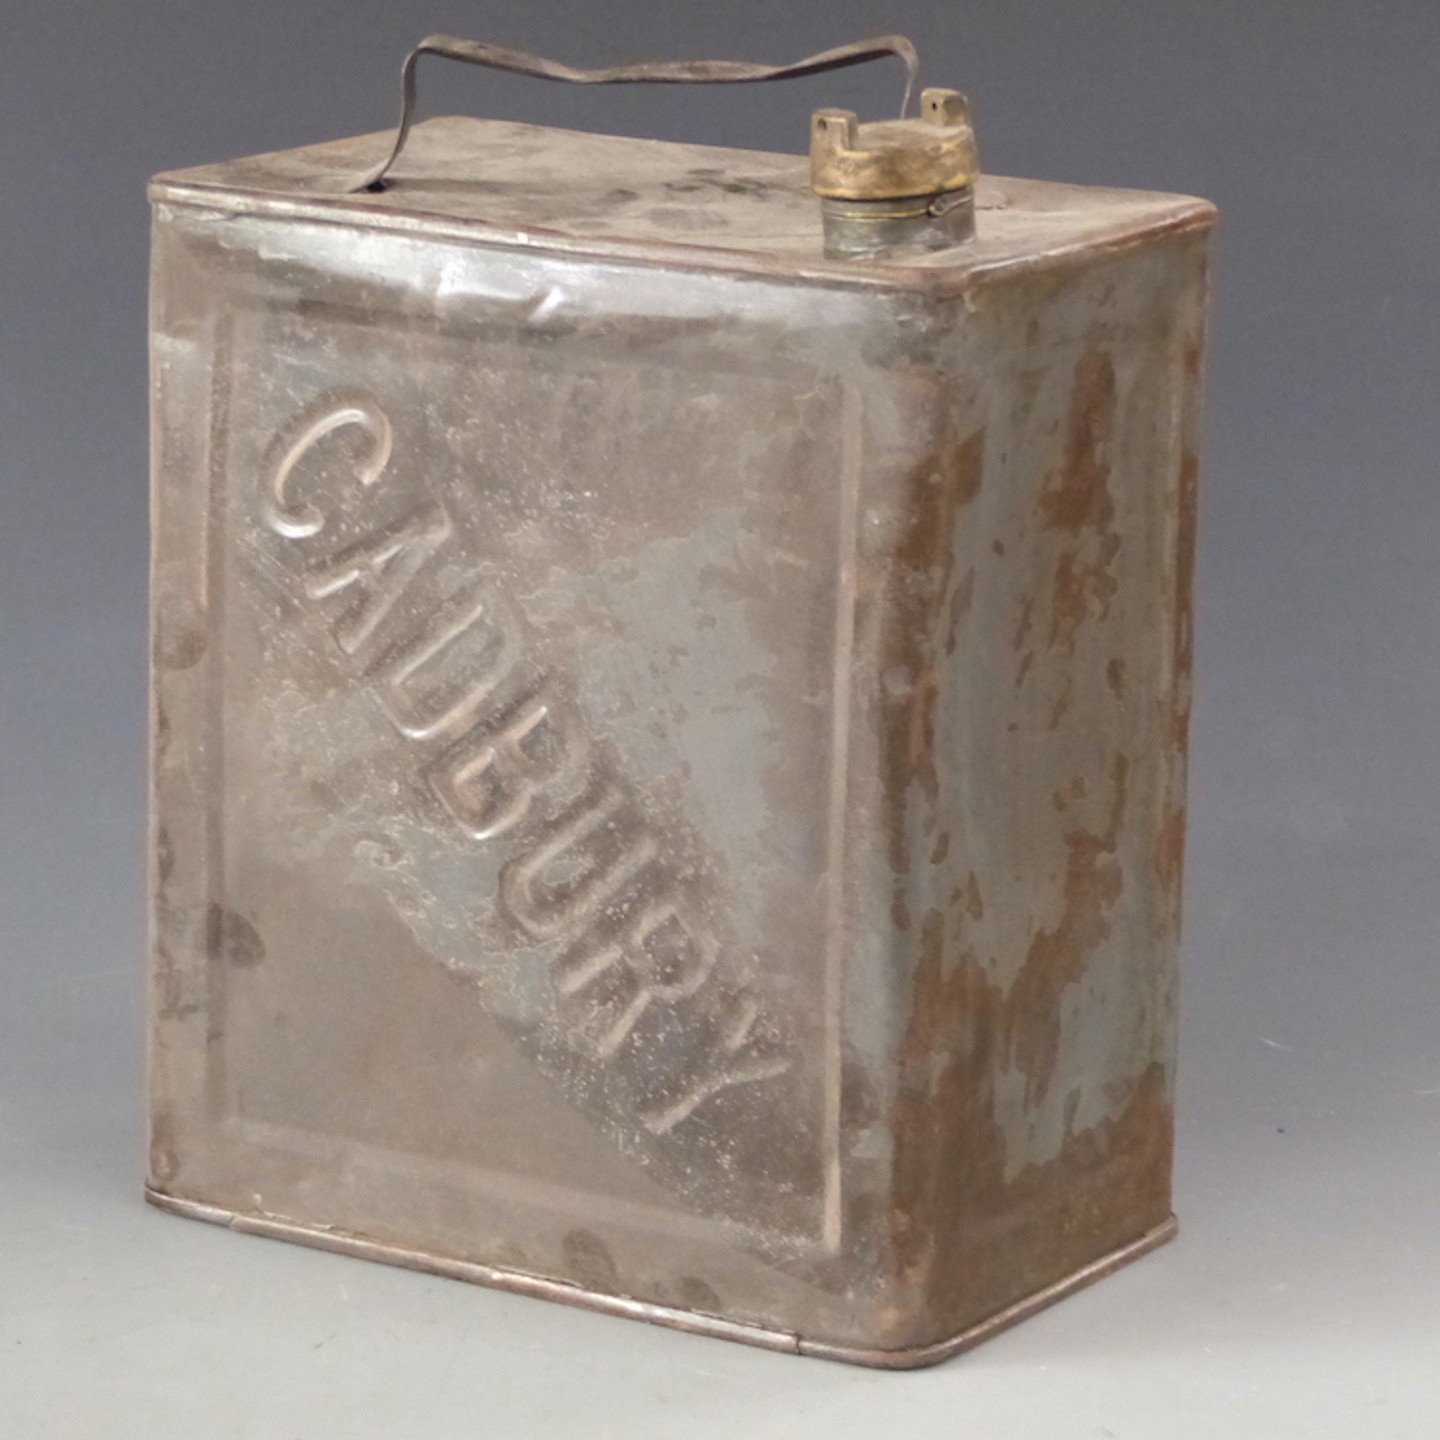 1912 Cadbury Motor Spirit Vintage Two Gallon Petrol Can Marked To Handle 2 12 And Valor Makers B'ham. Sold For £950